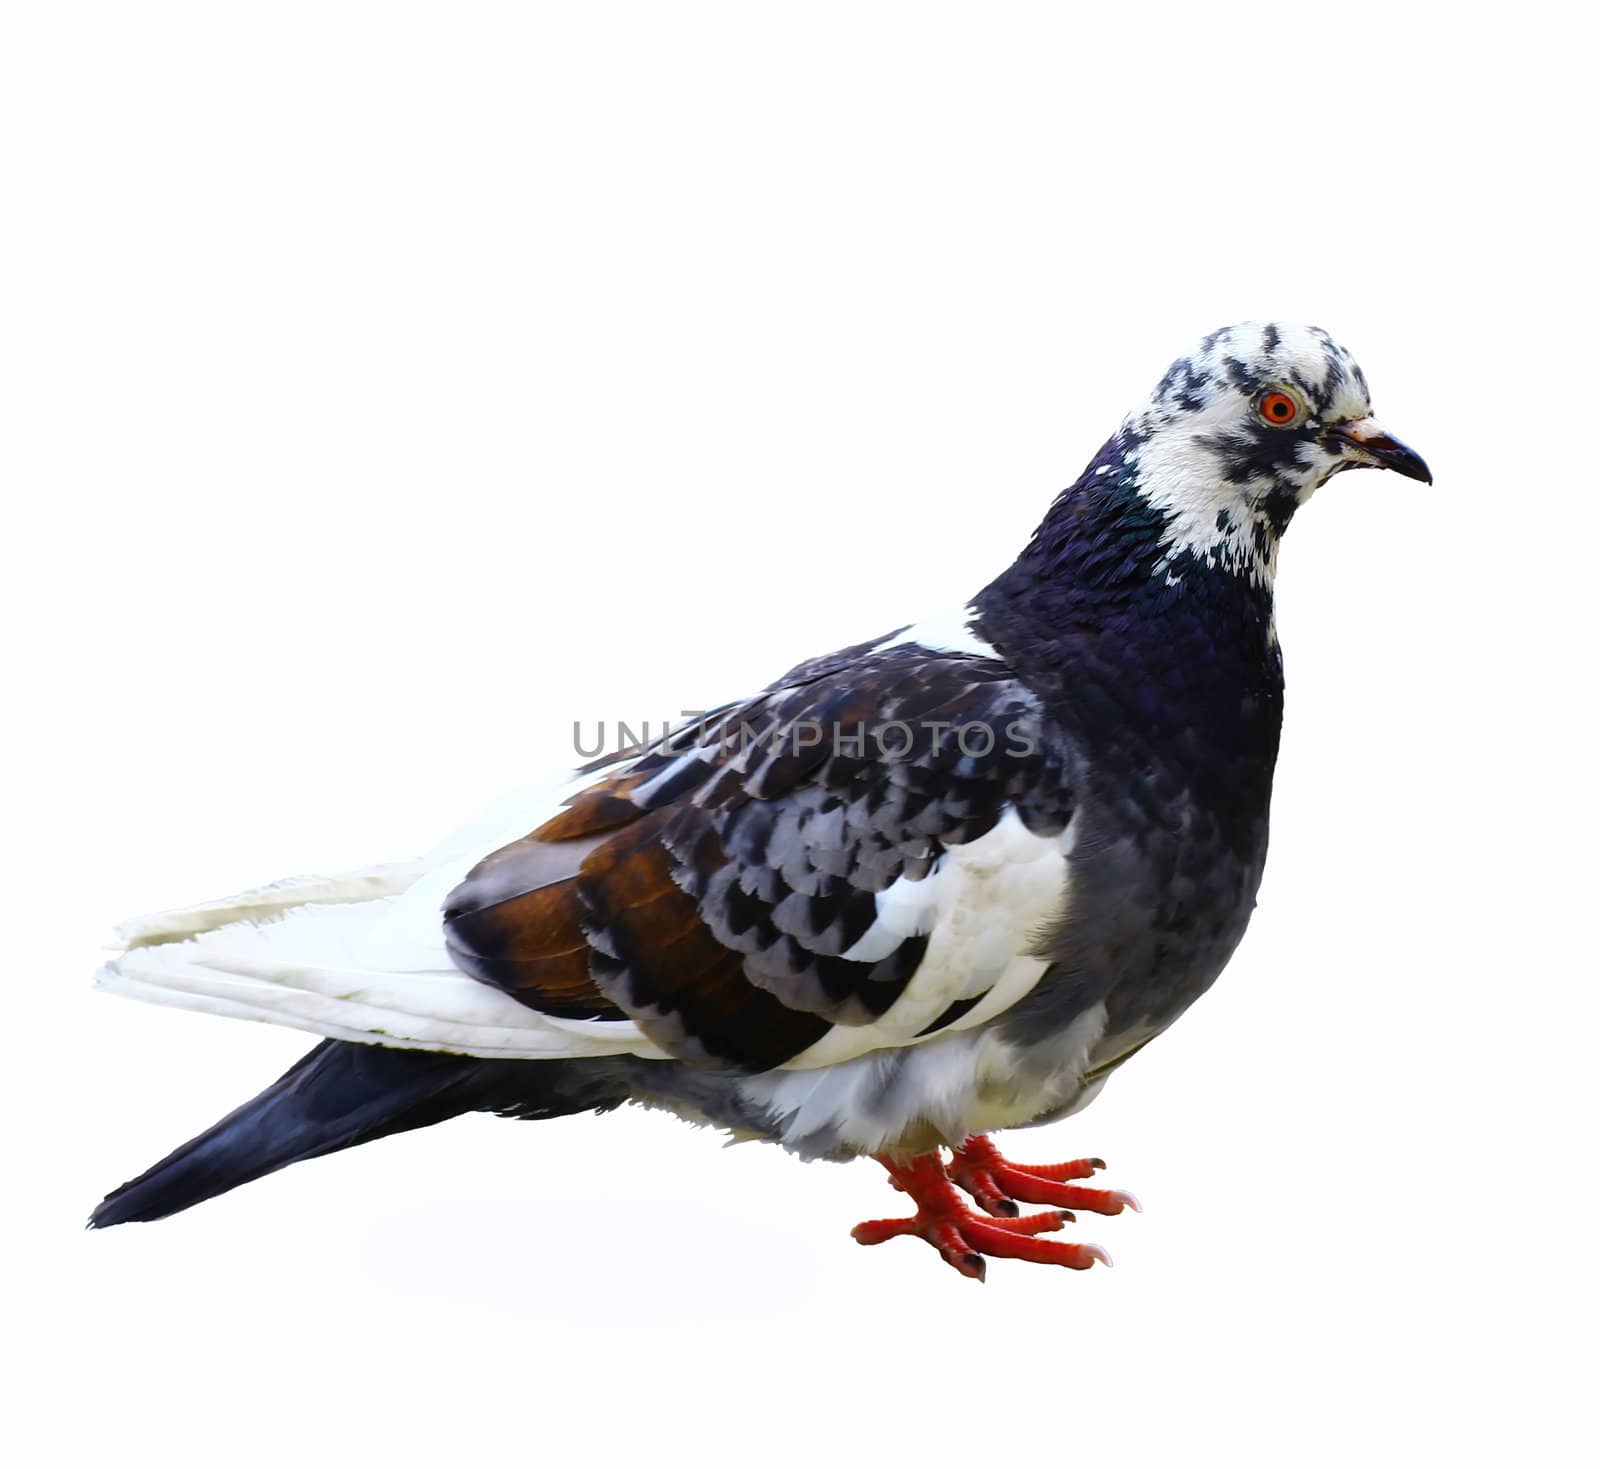  Portrait of a pigeon in full growth. Isolate